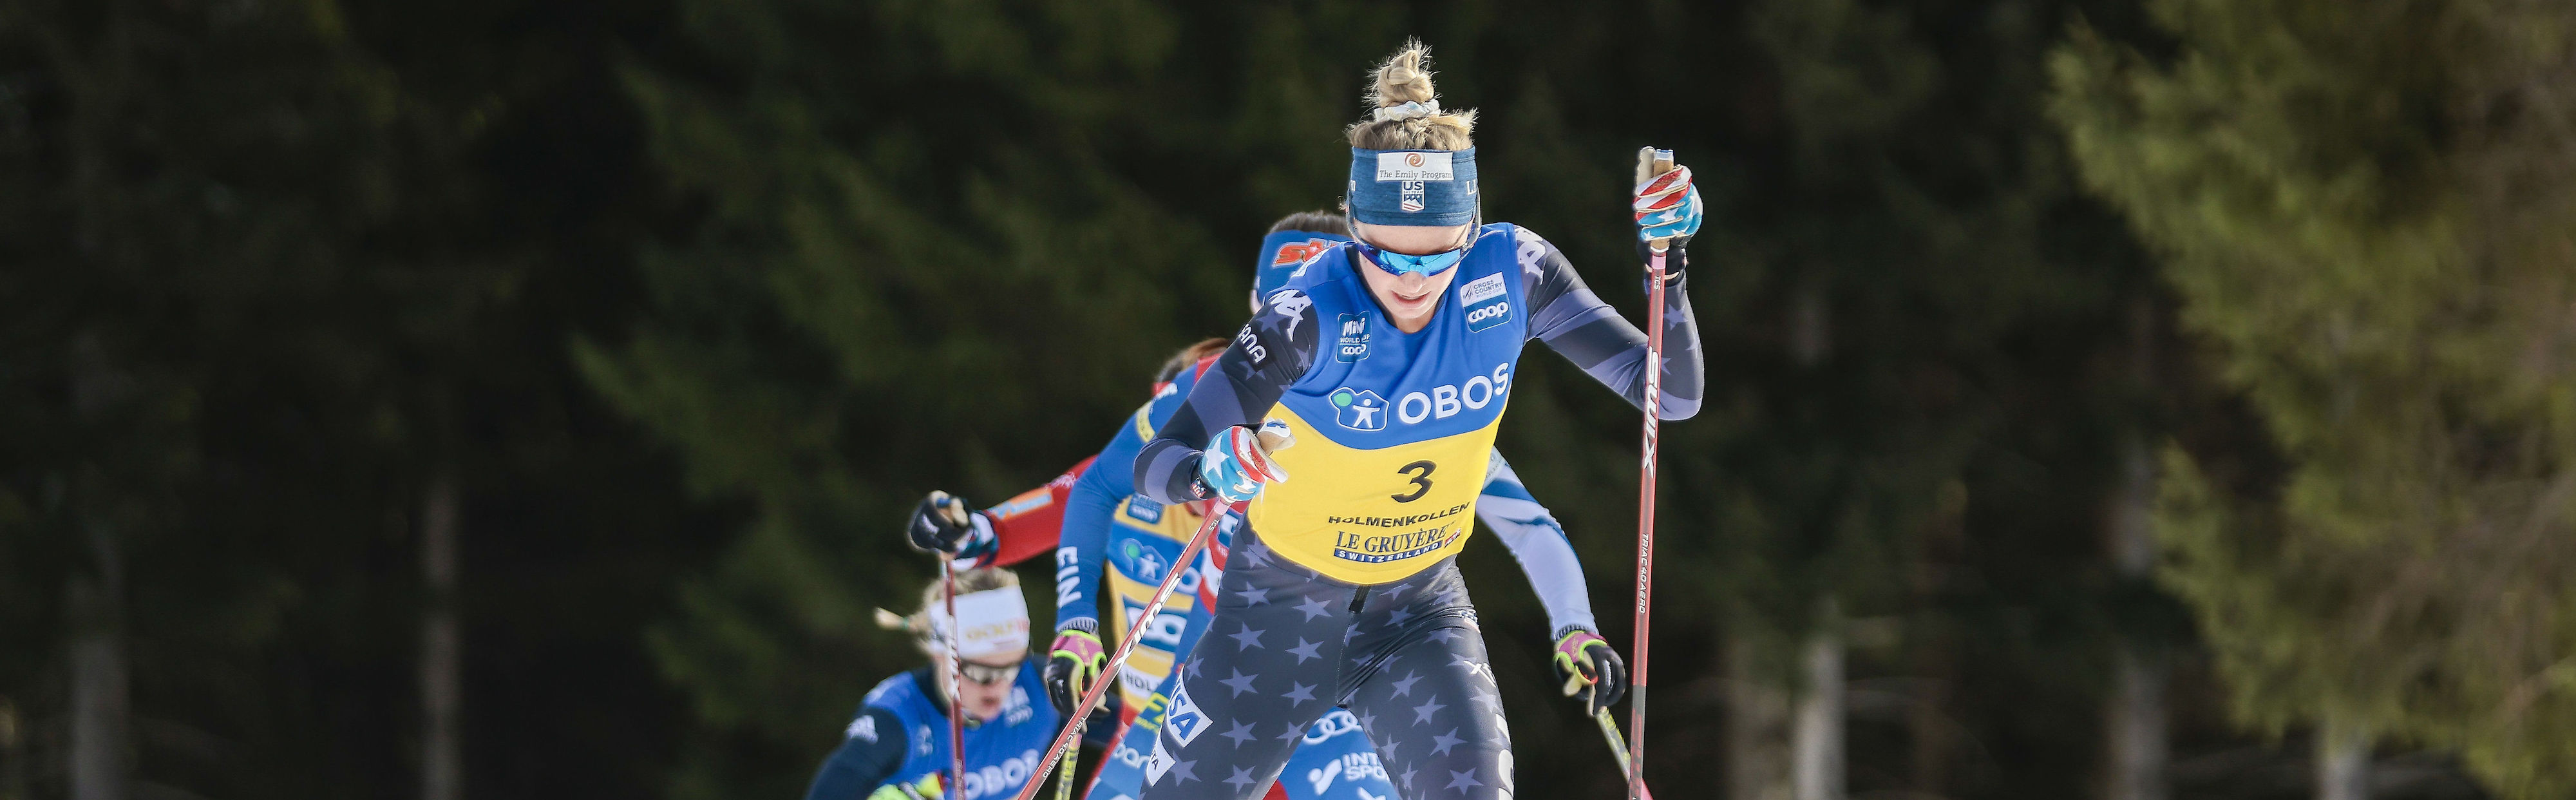 Jessie Diggins skiing in a skate race during the 2022-23 season